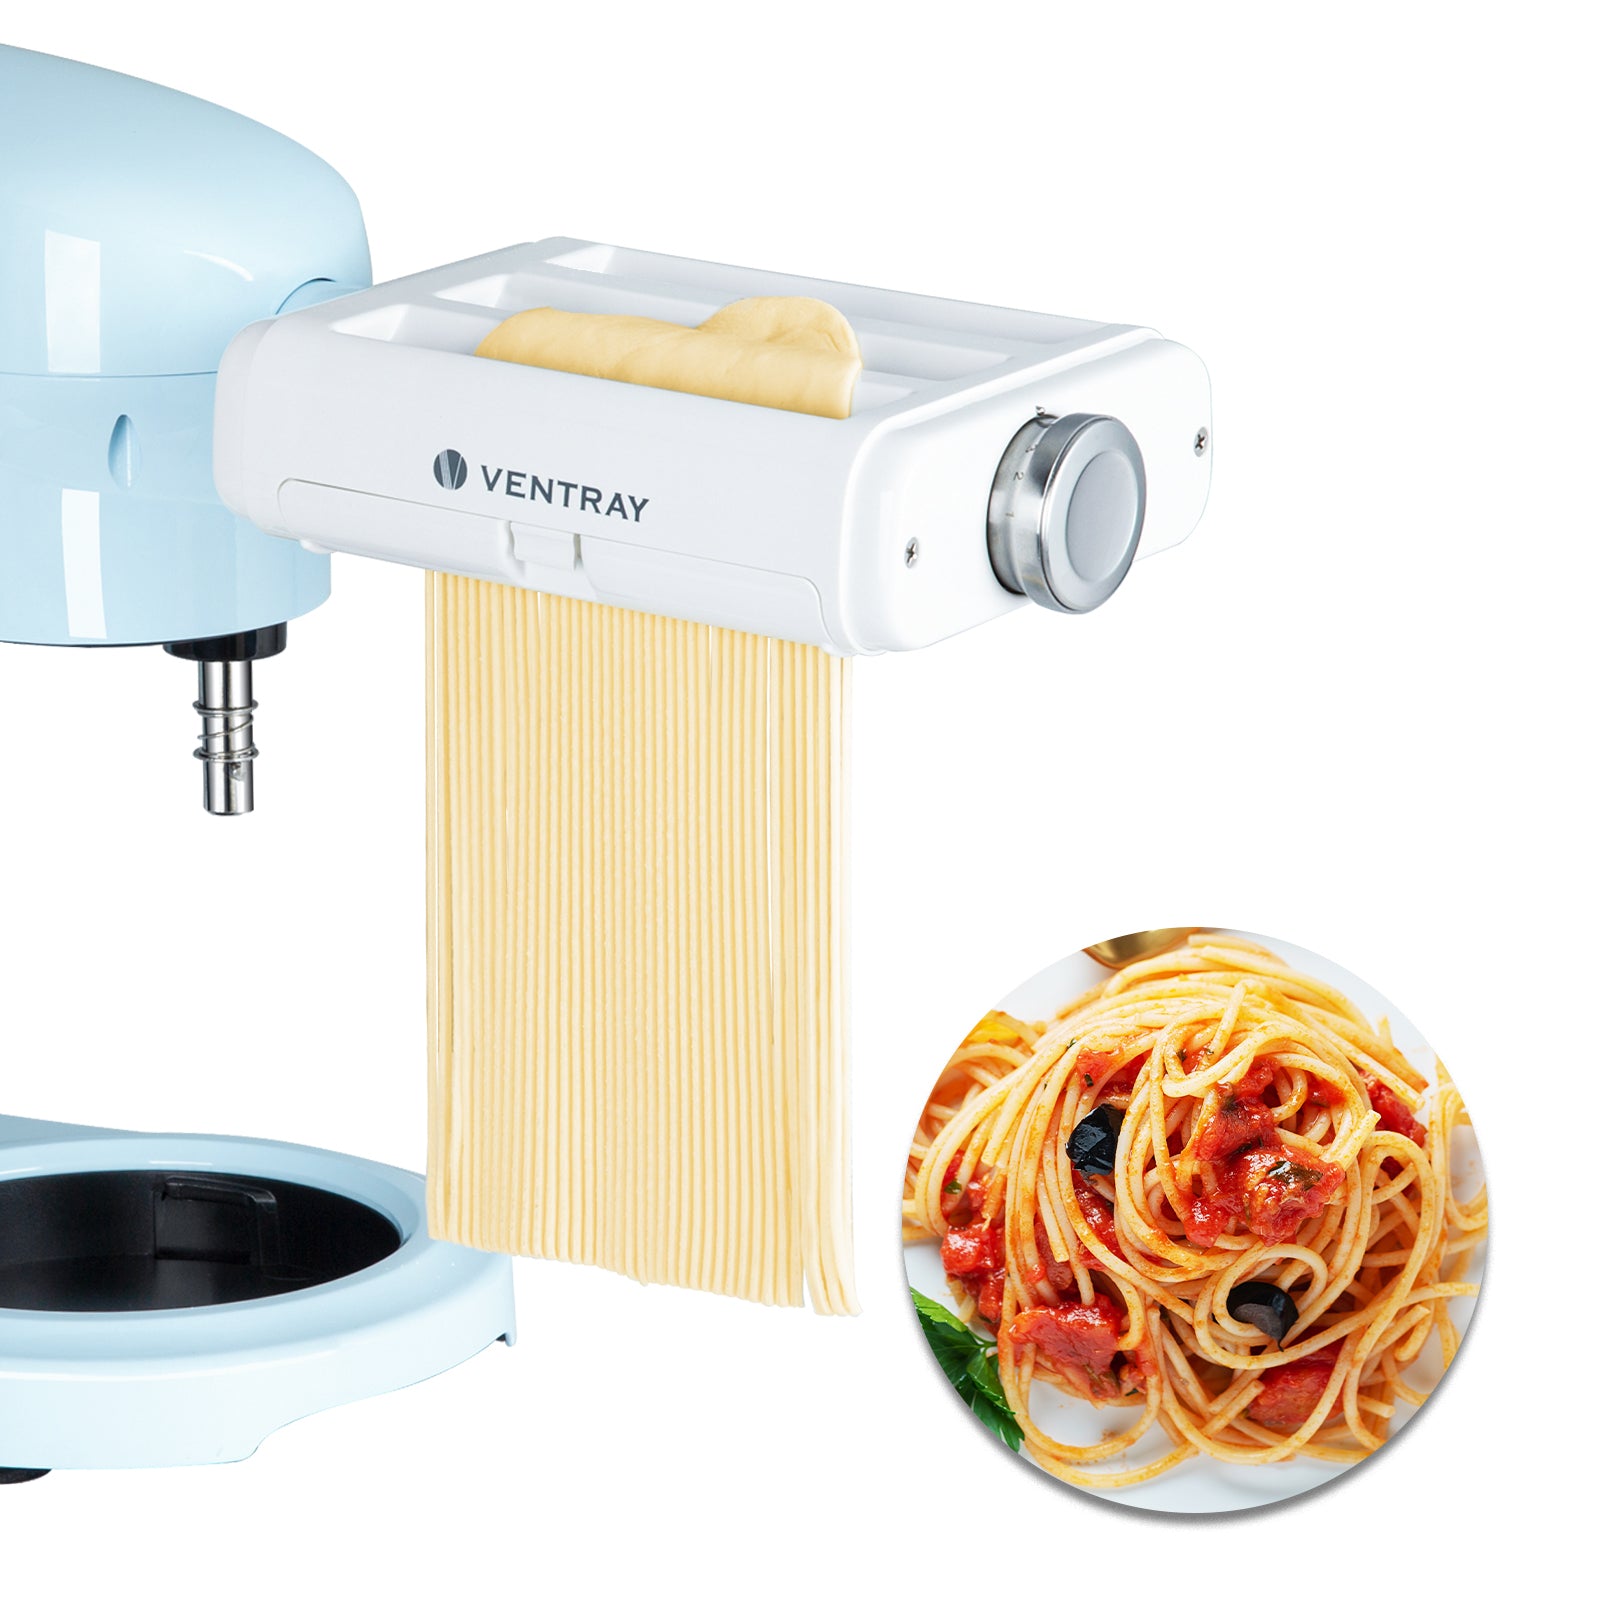 Antree 3 in 1 Pasta Roller Cutter Attachment for KitchenAid Mixer 